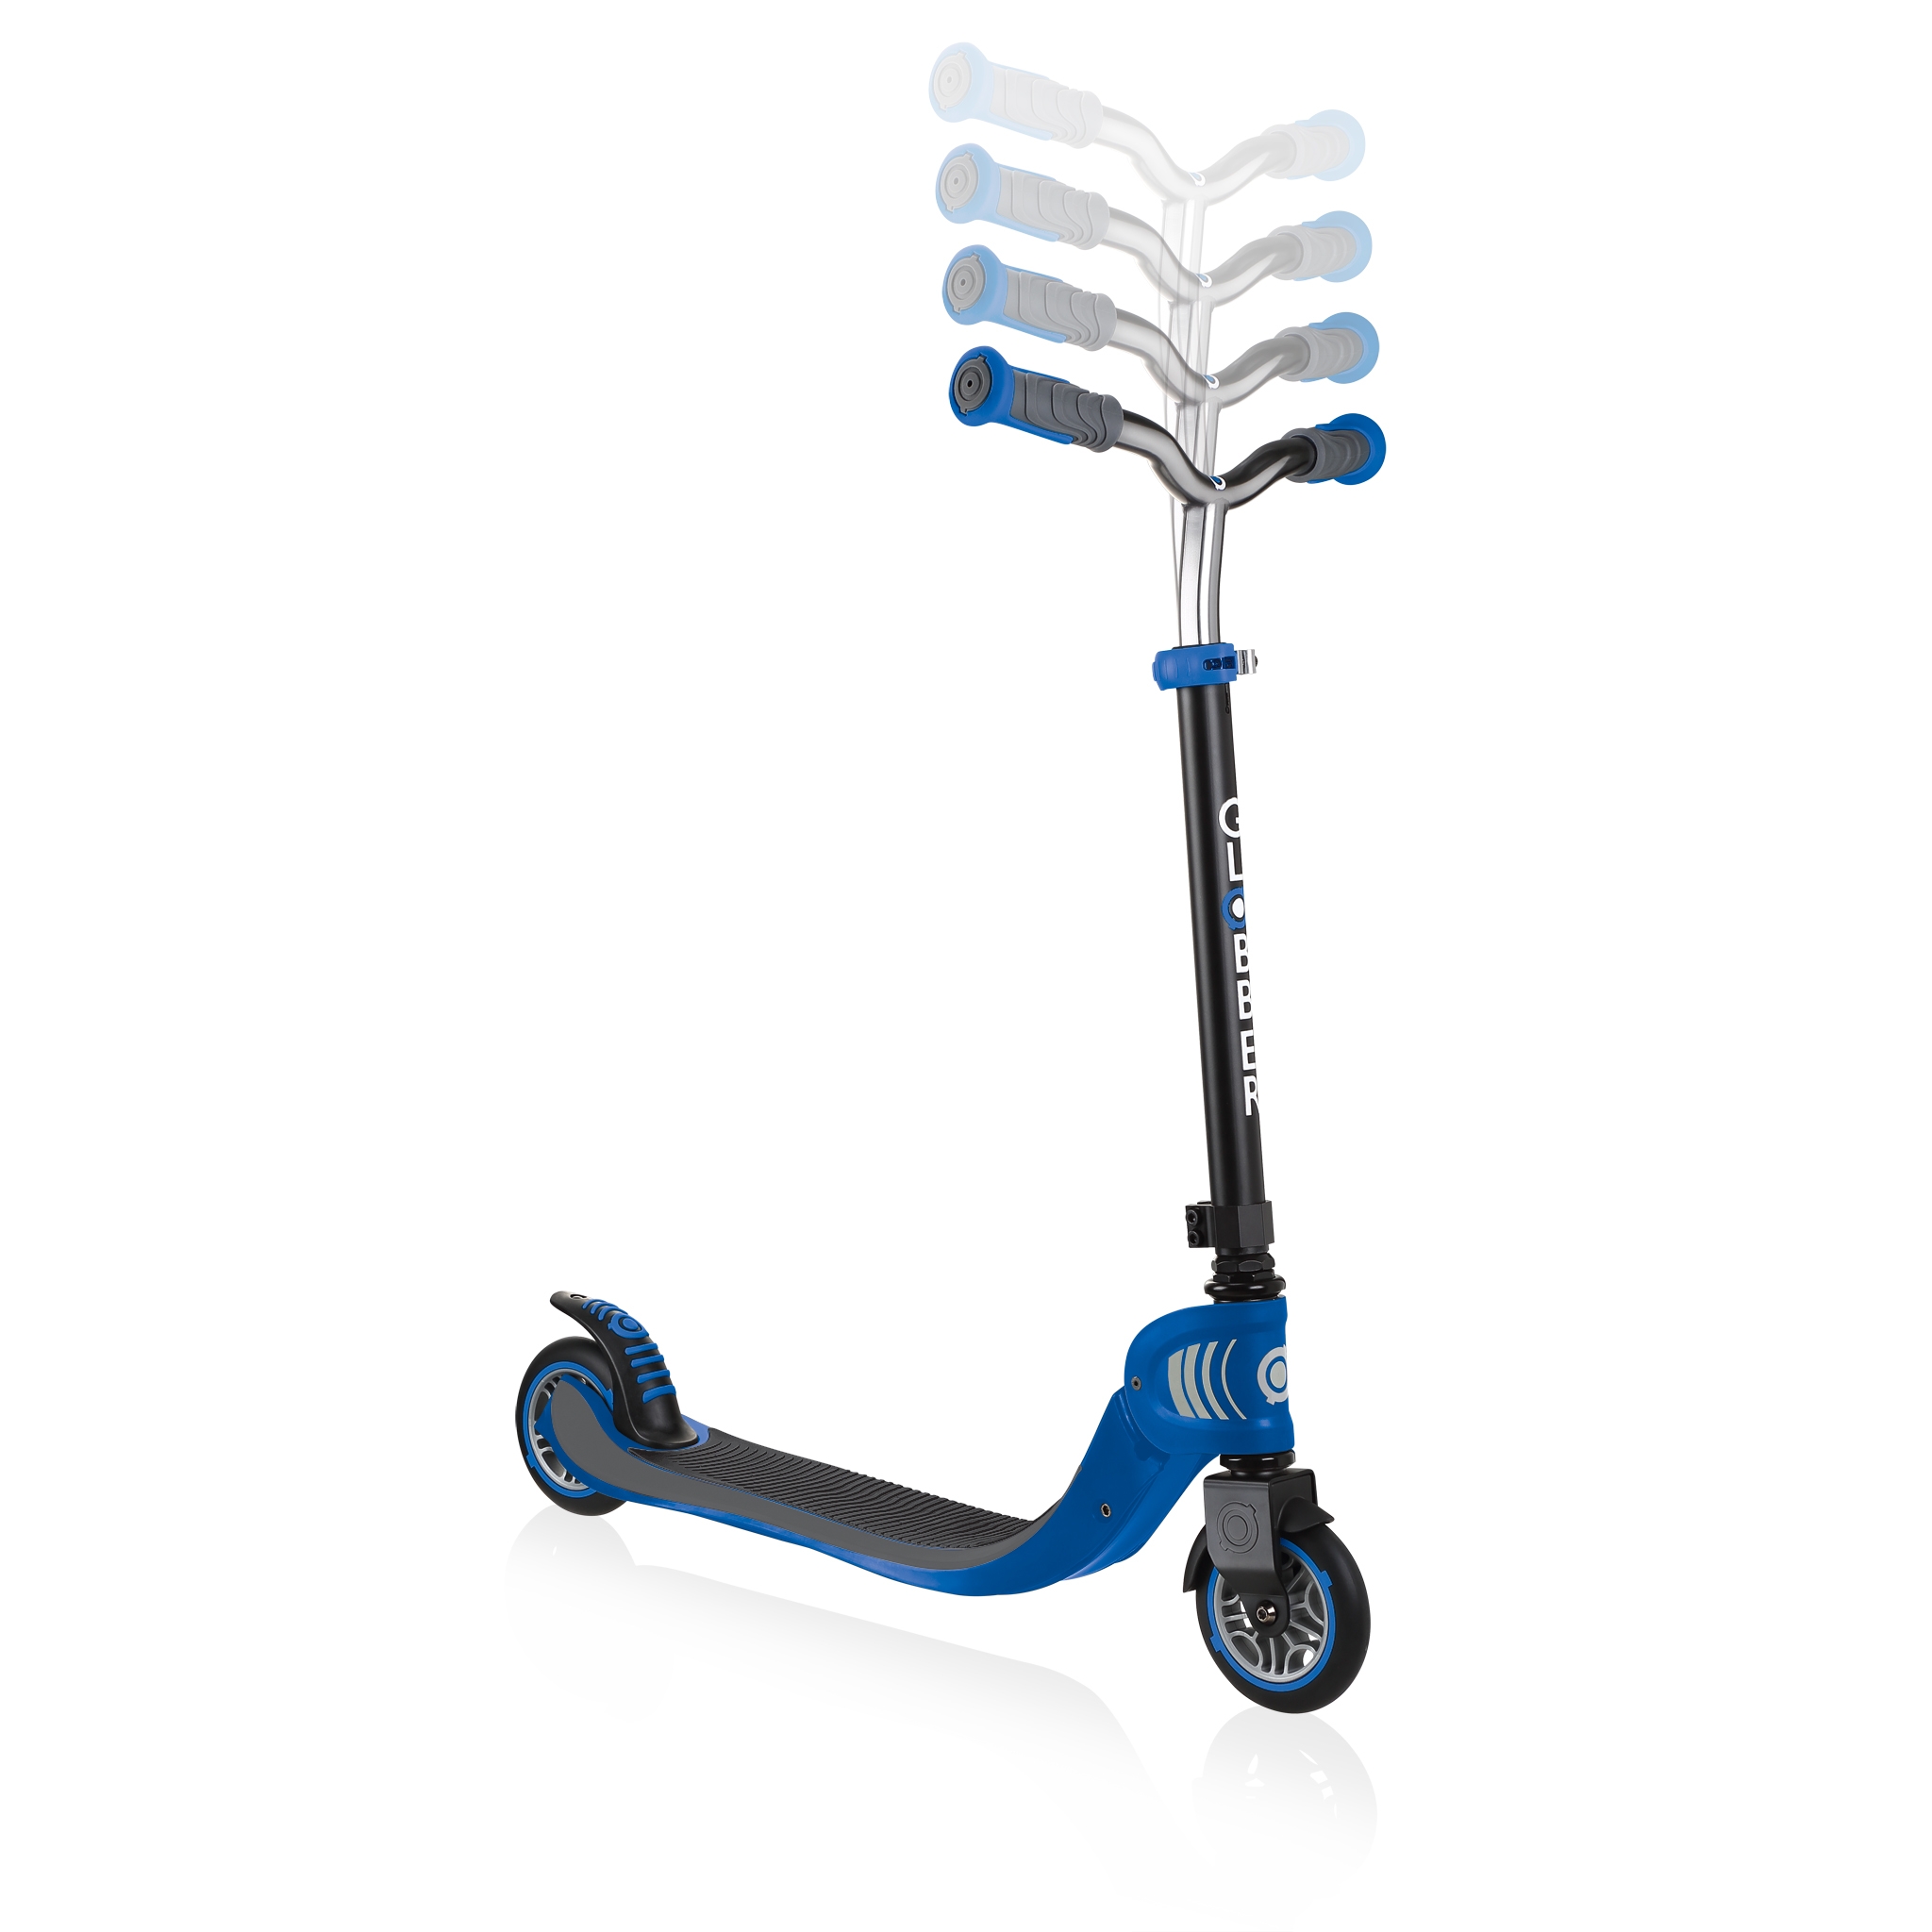 FLOW-FOLDABLE-125-2-wheel-scooter-for-kids-with-adjustable-t-bar-navy-blue 2